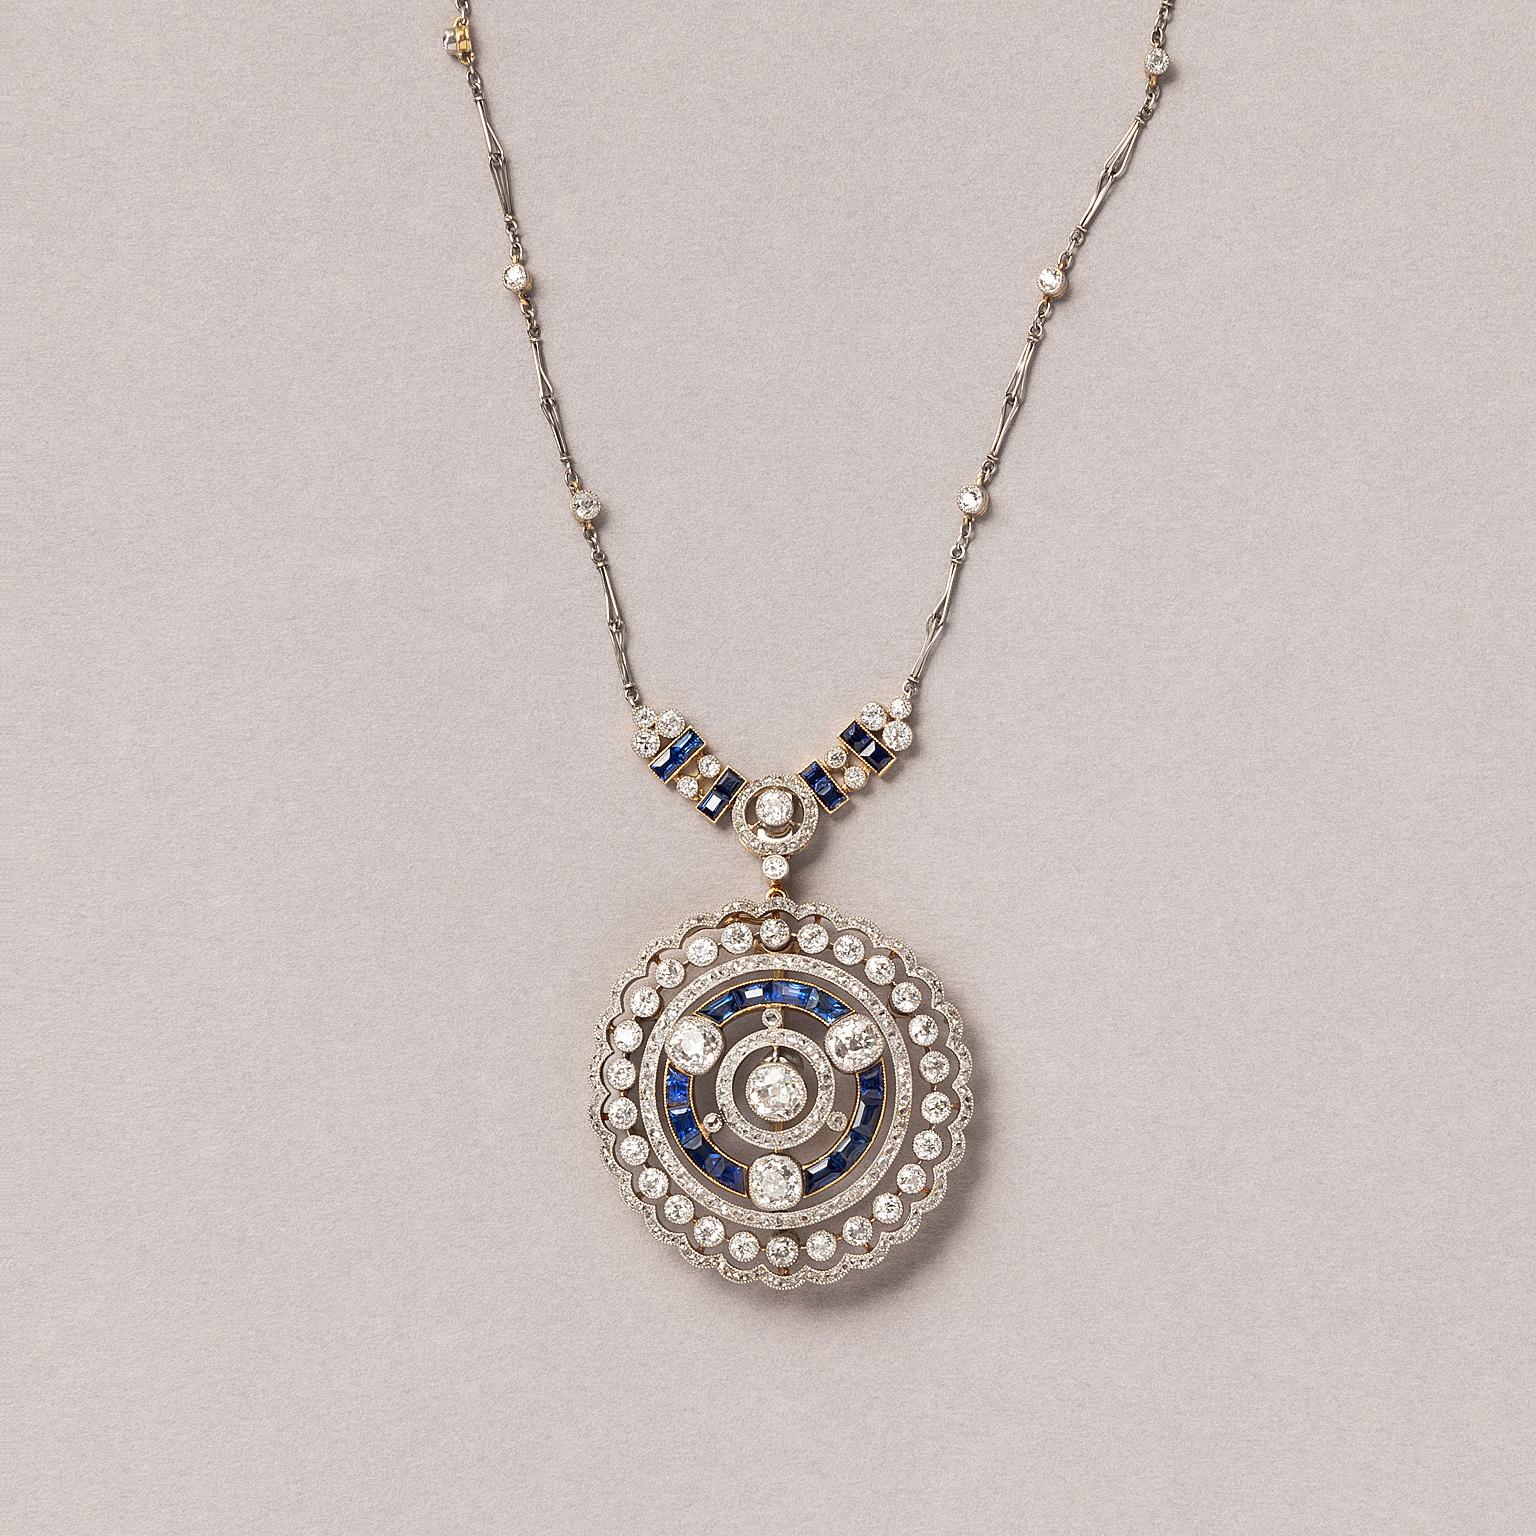 Women's or Men's A Diamond and Sapphire necklace or Pendant or Brooch